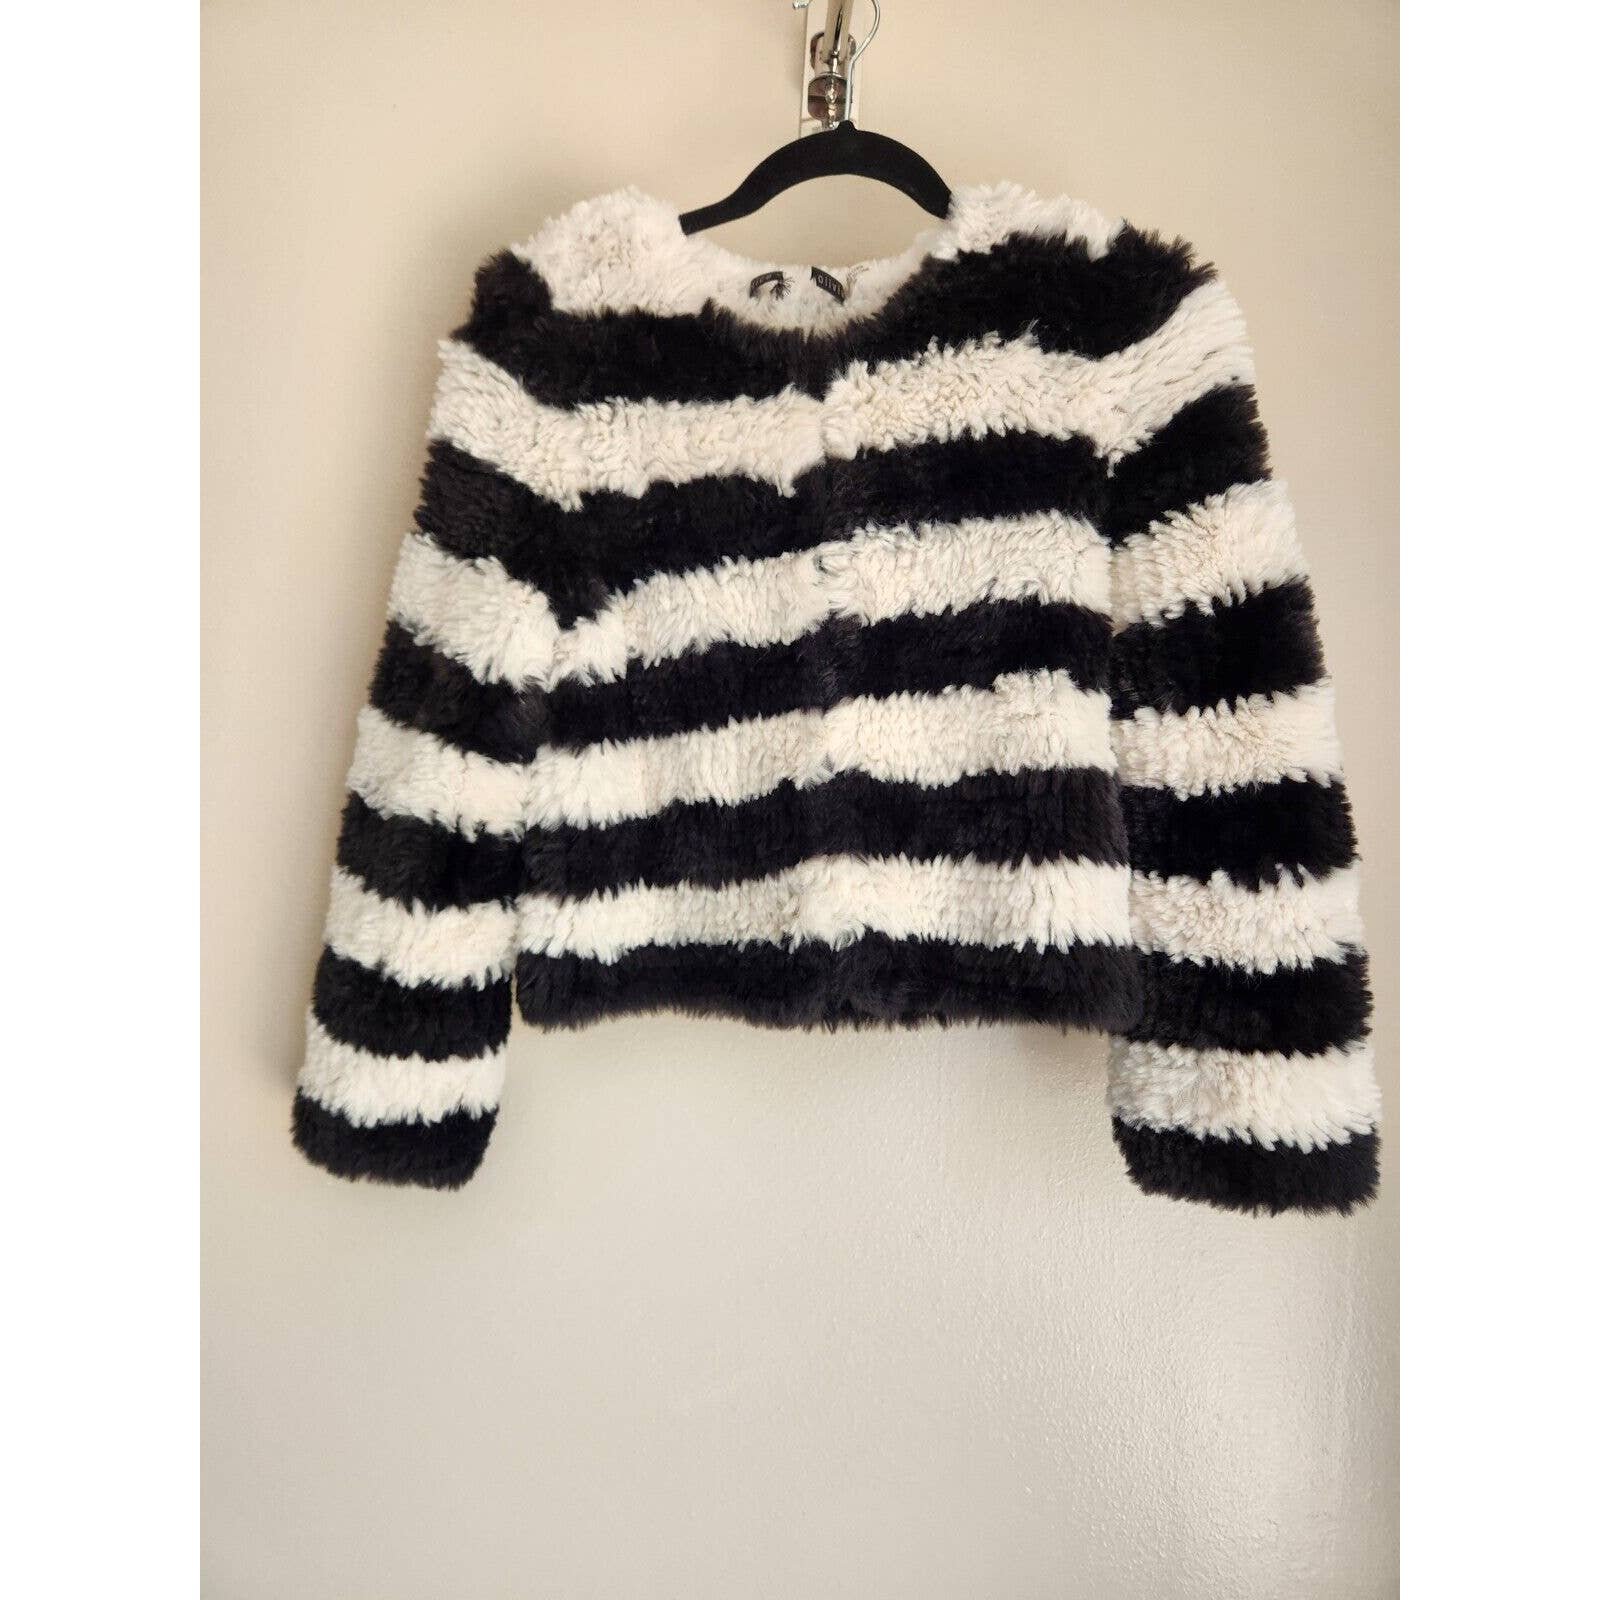 Latest  NWOT ALICE + OLIVIA Fawn Striped Faux Fur jacket Size S Black/White Runs Small IVIAwgokf Outlet Store